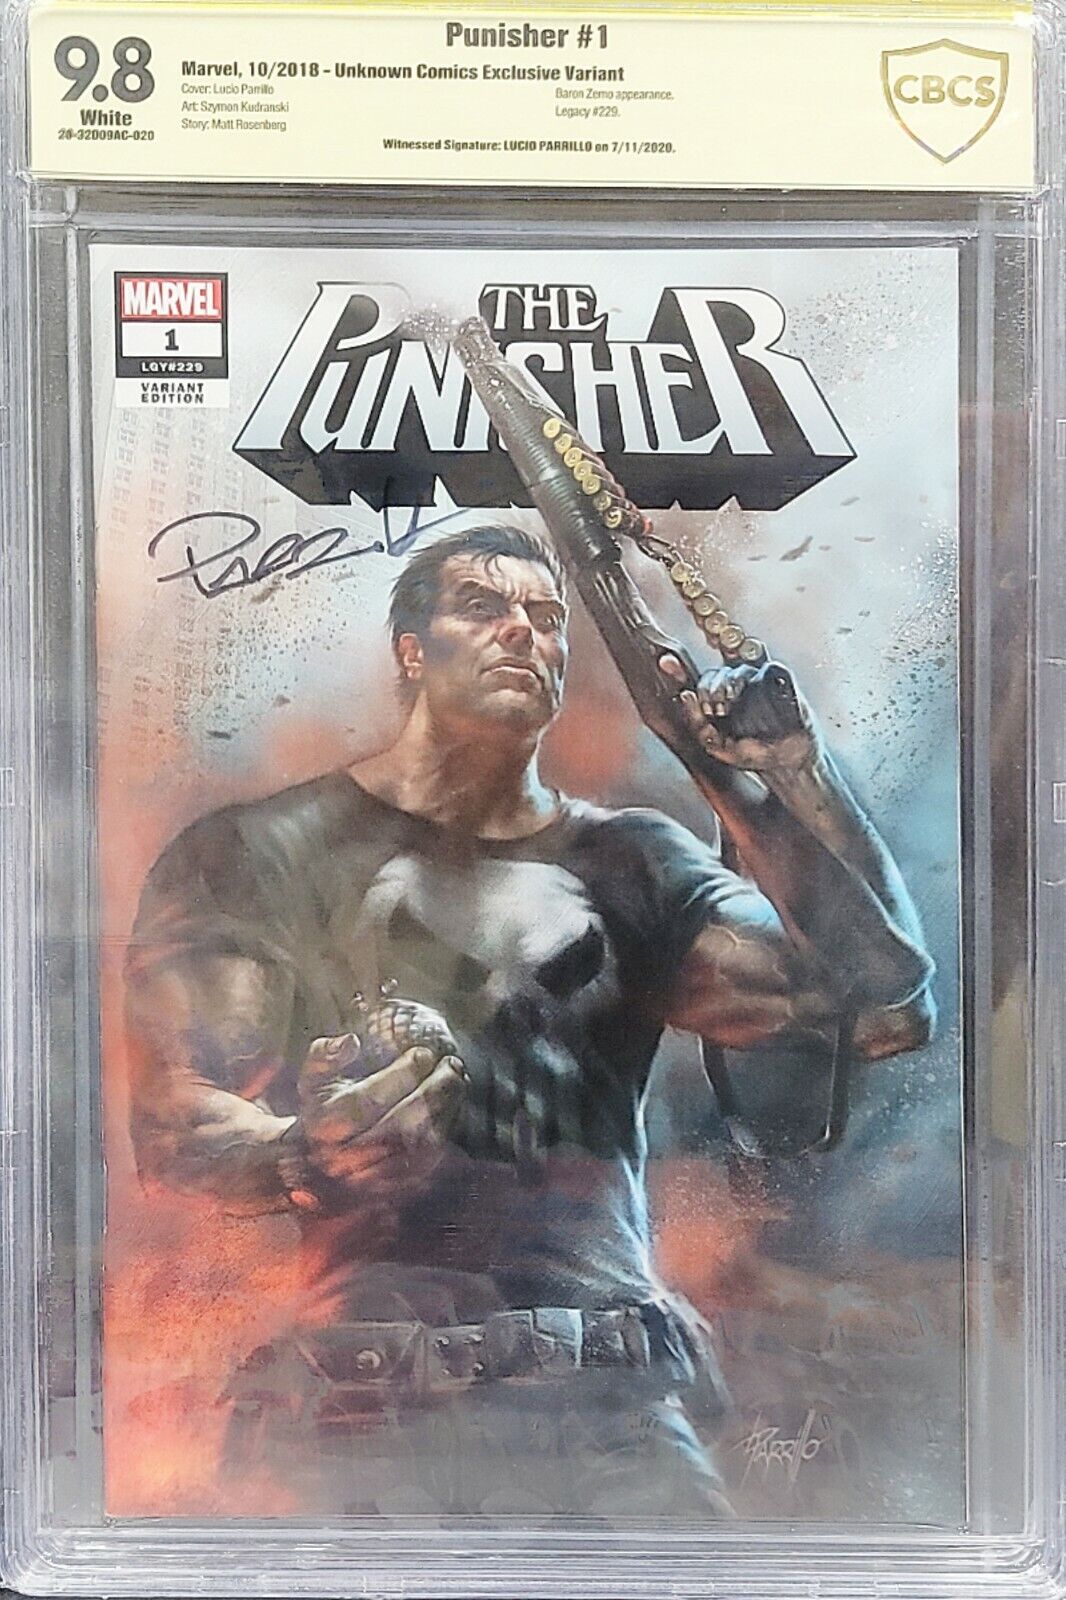 The Punisher #1 2015 Parrillio CBCS 9.8 WP Signed by Parrillo